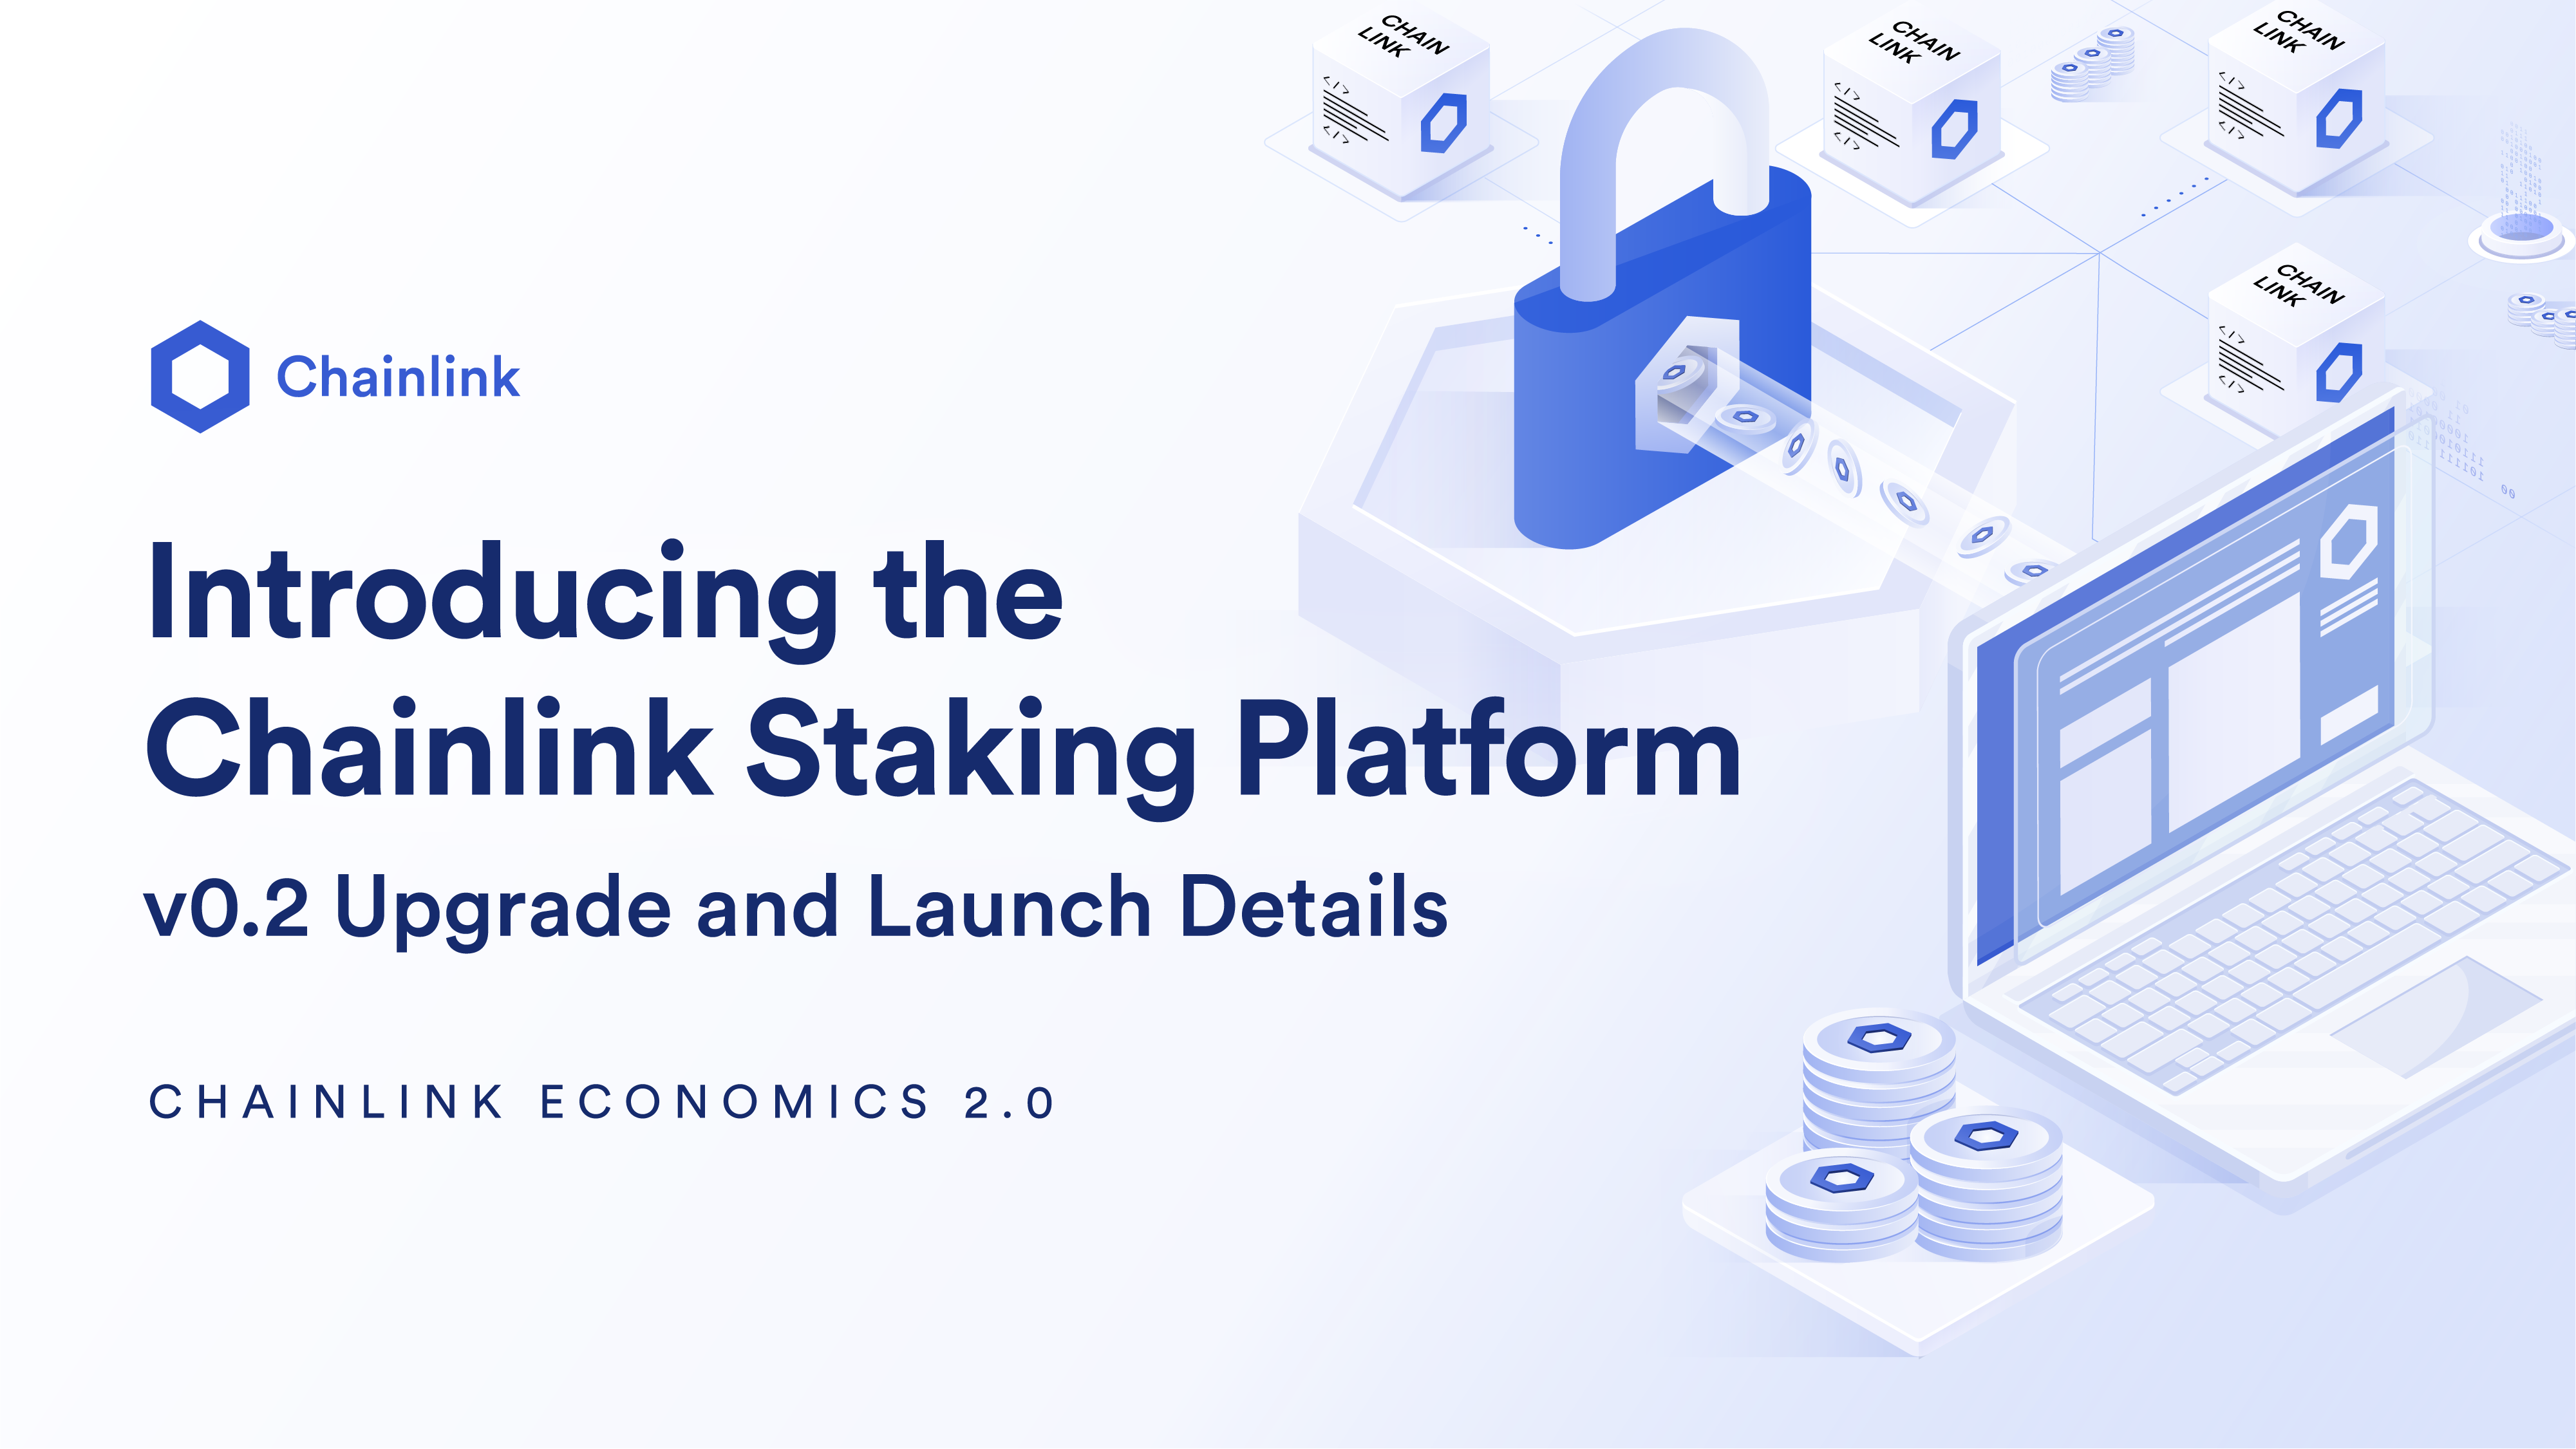 Chainlink Staking v Goes Live on Mainnet, Will LINK Price Build on +5% Weekly Gain? | CoinCodex